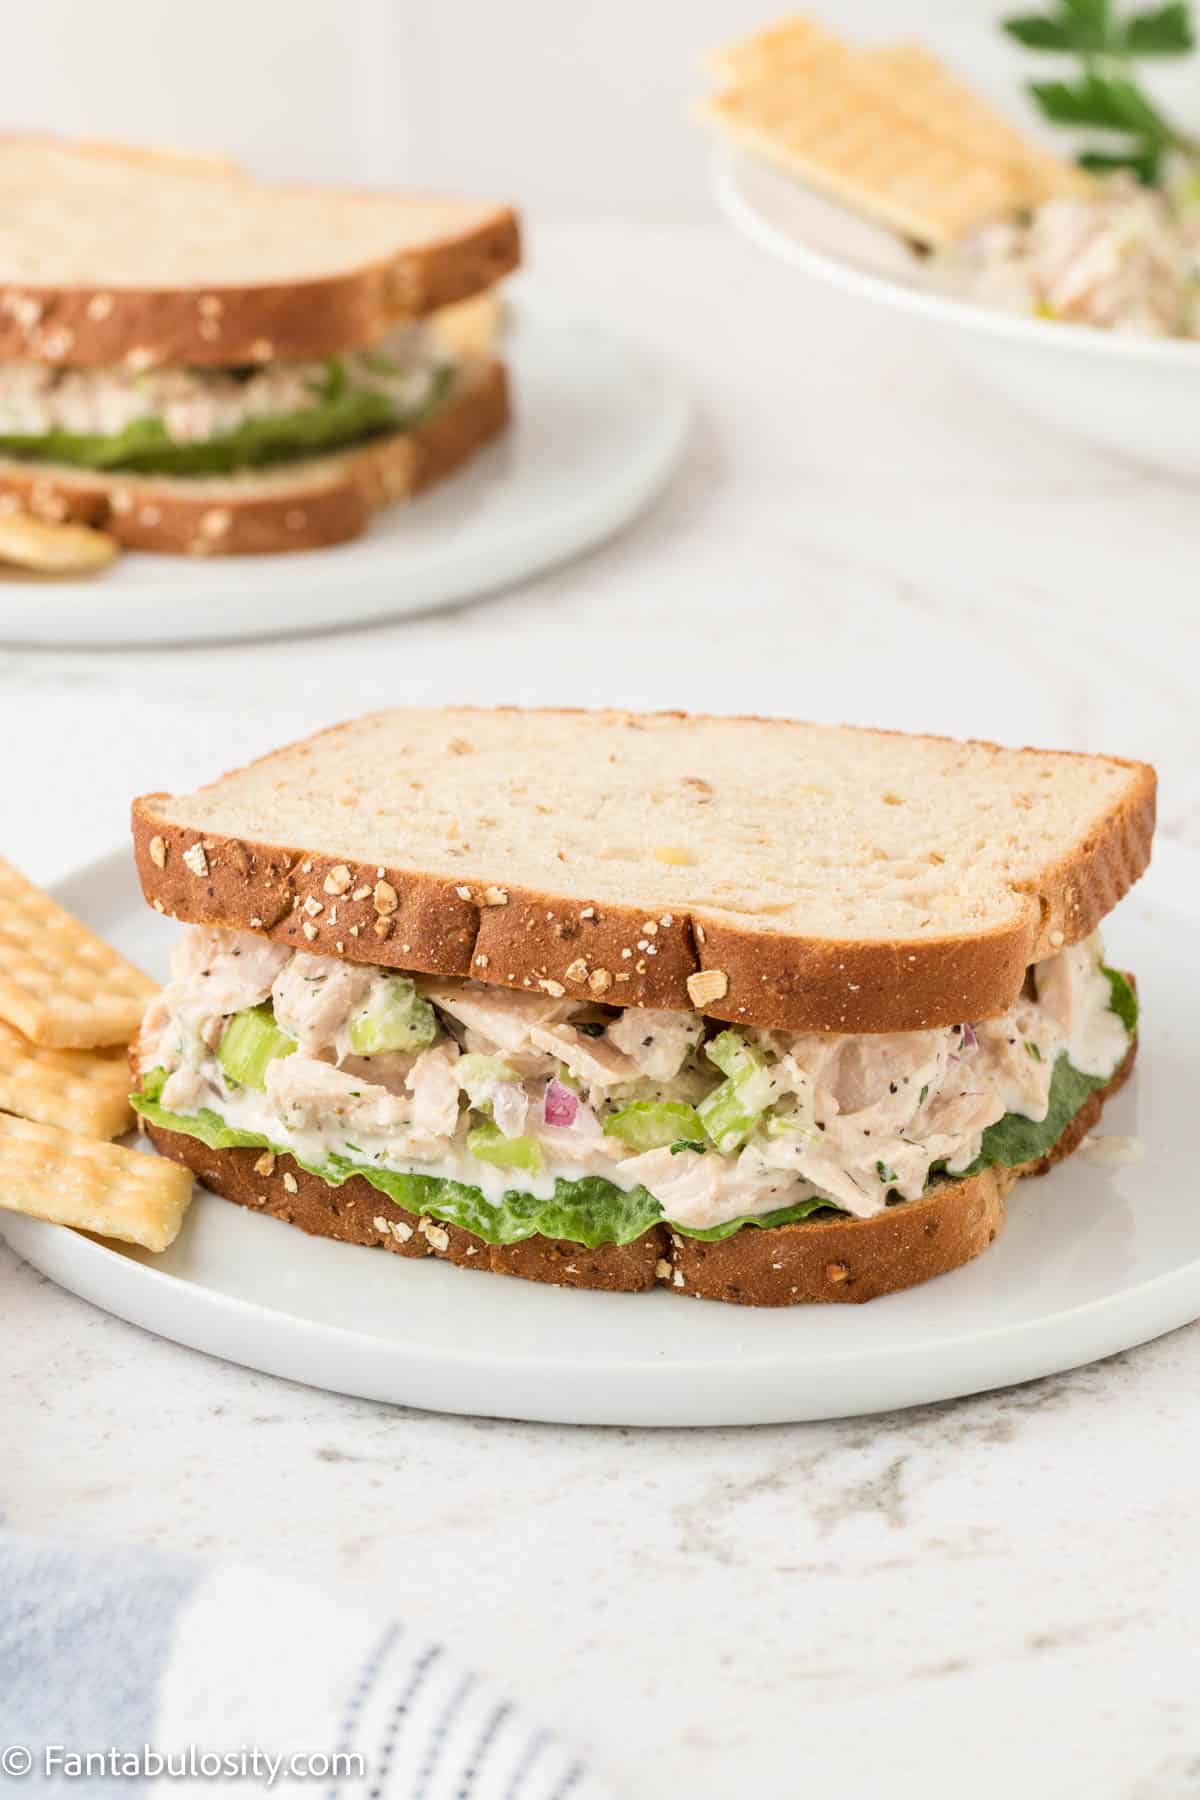 Tuna salad sandwich with crackers on plate